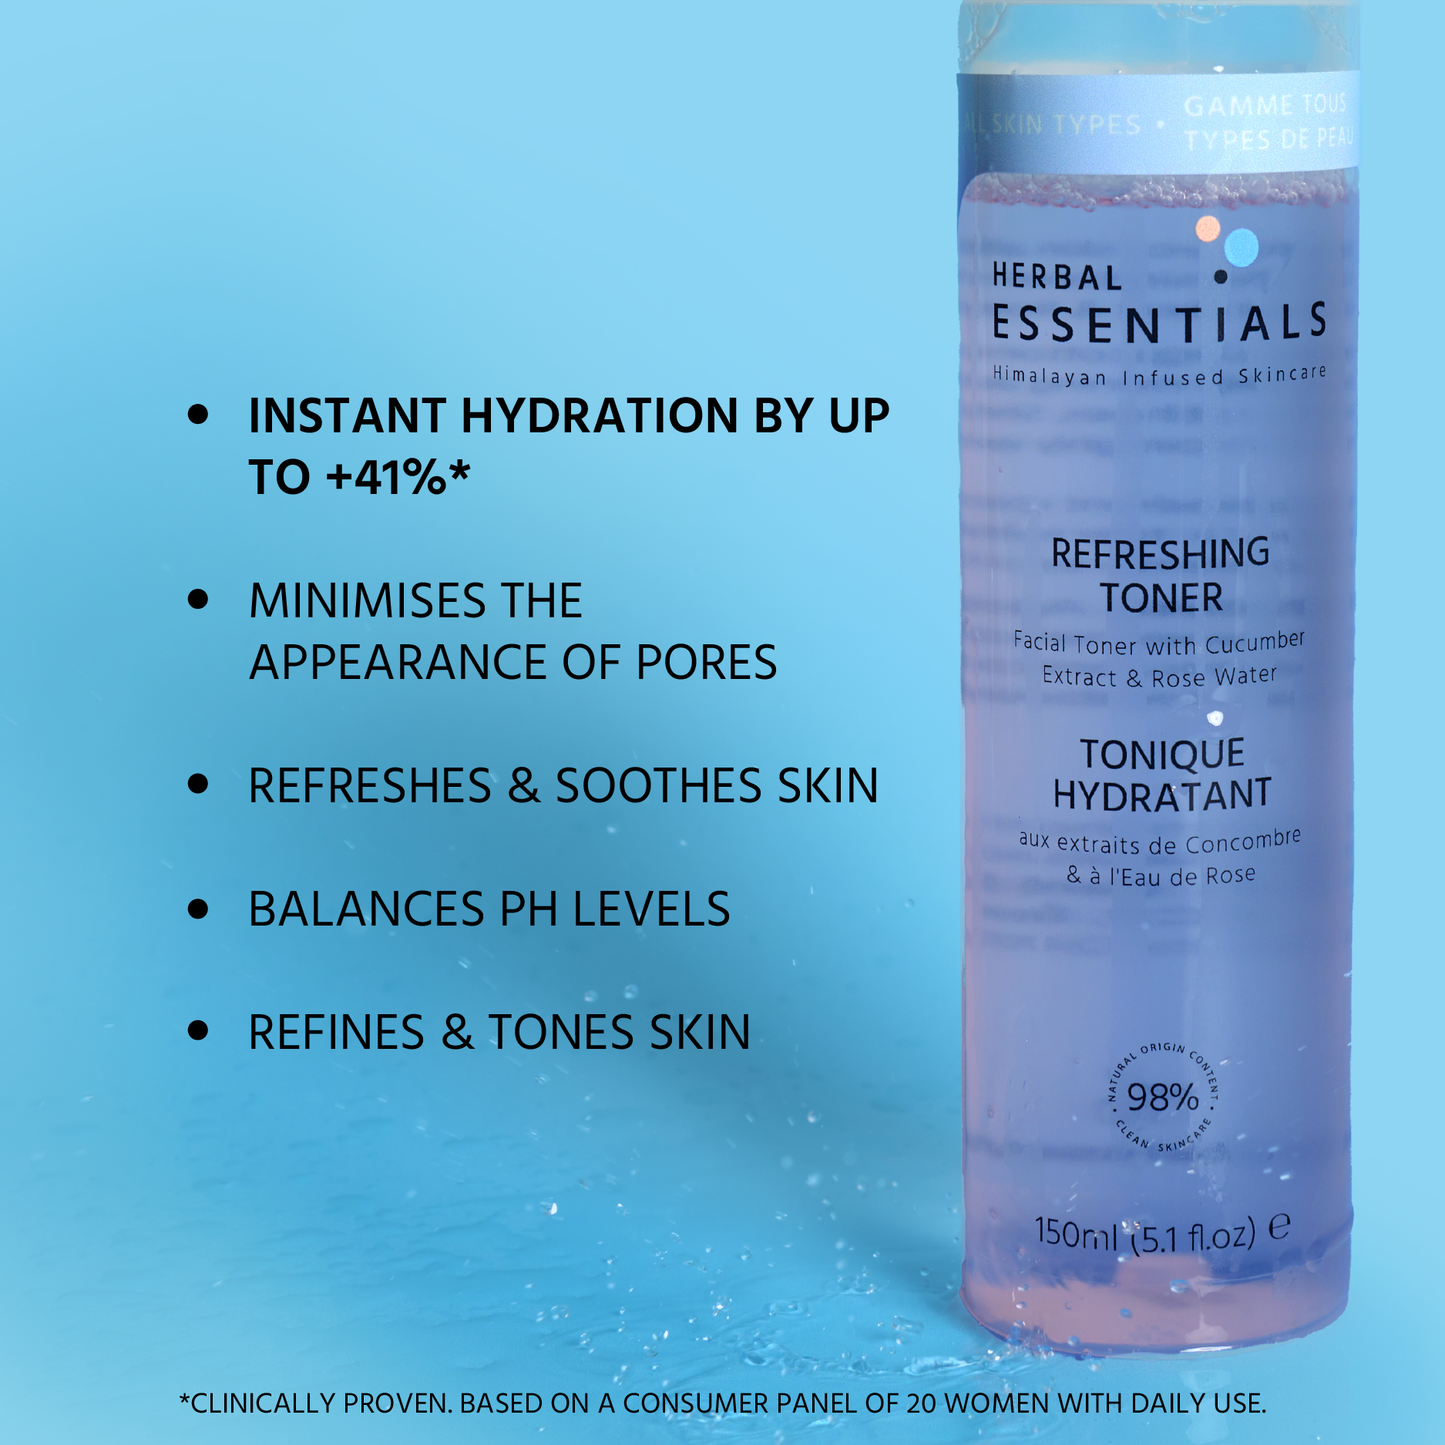 Herbal Essentials Refreshing Toner with Cucumber Extract & Rose Water